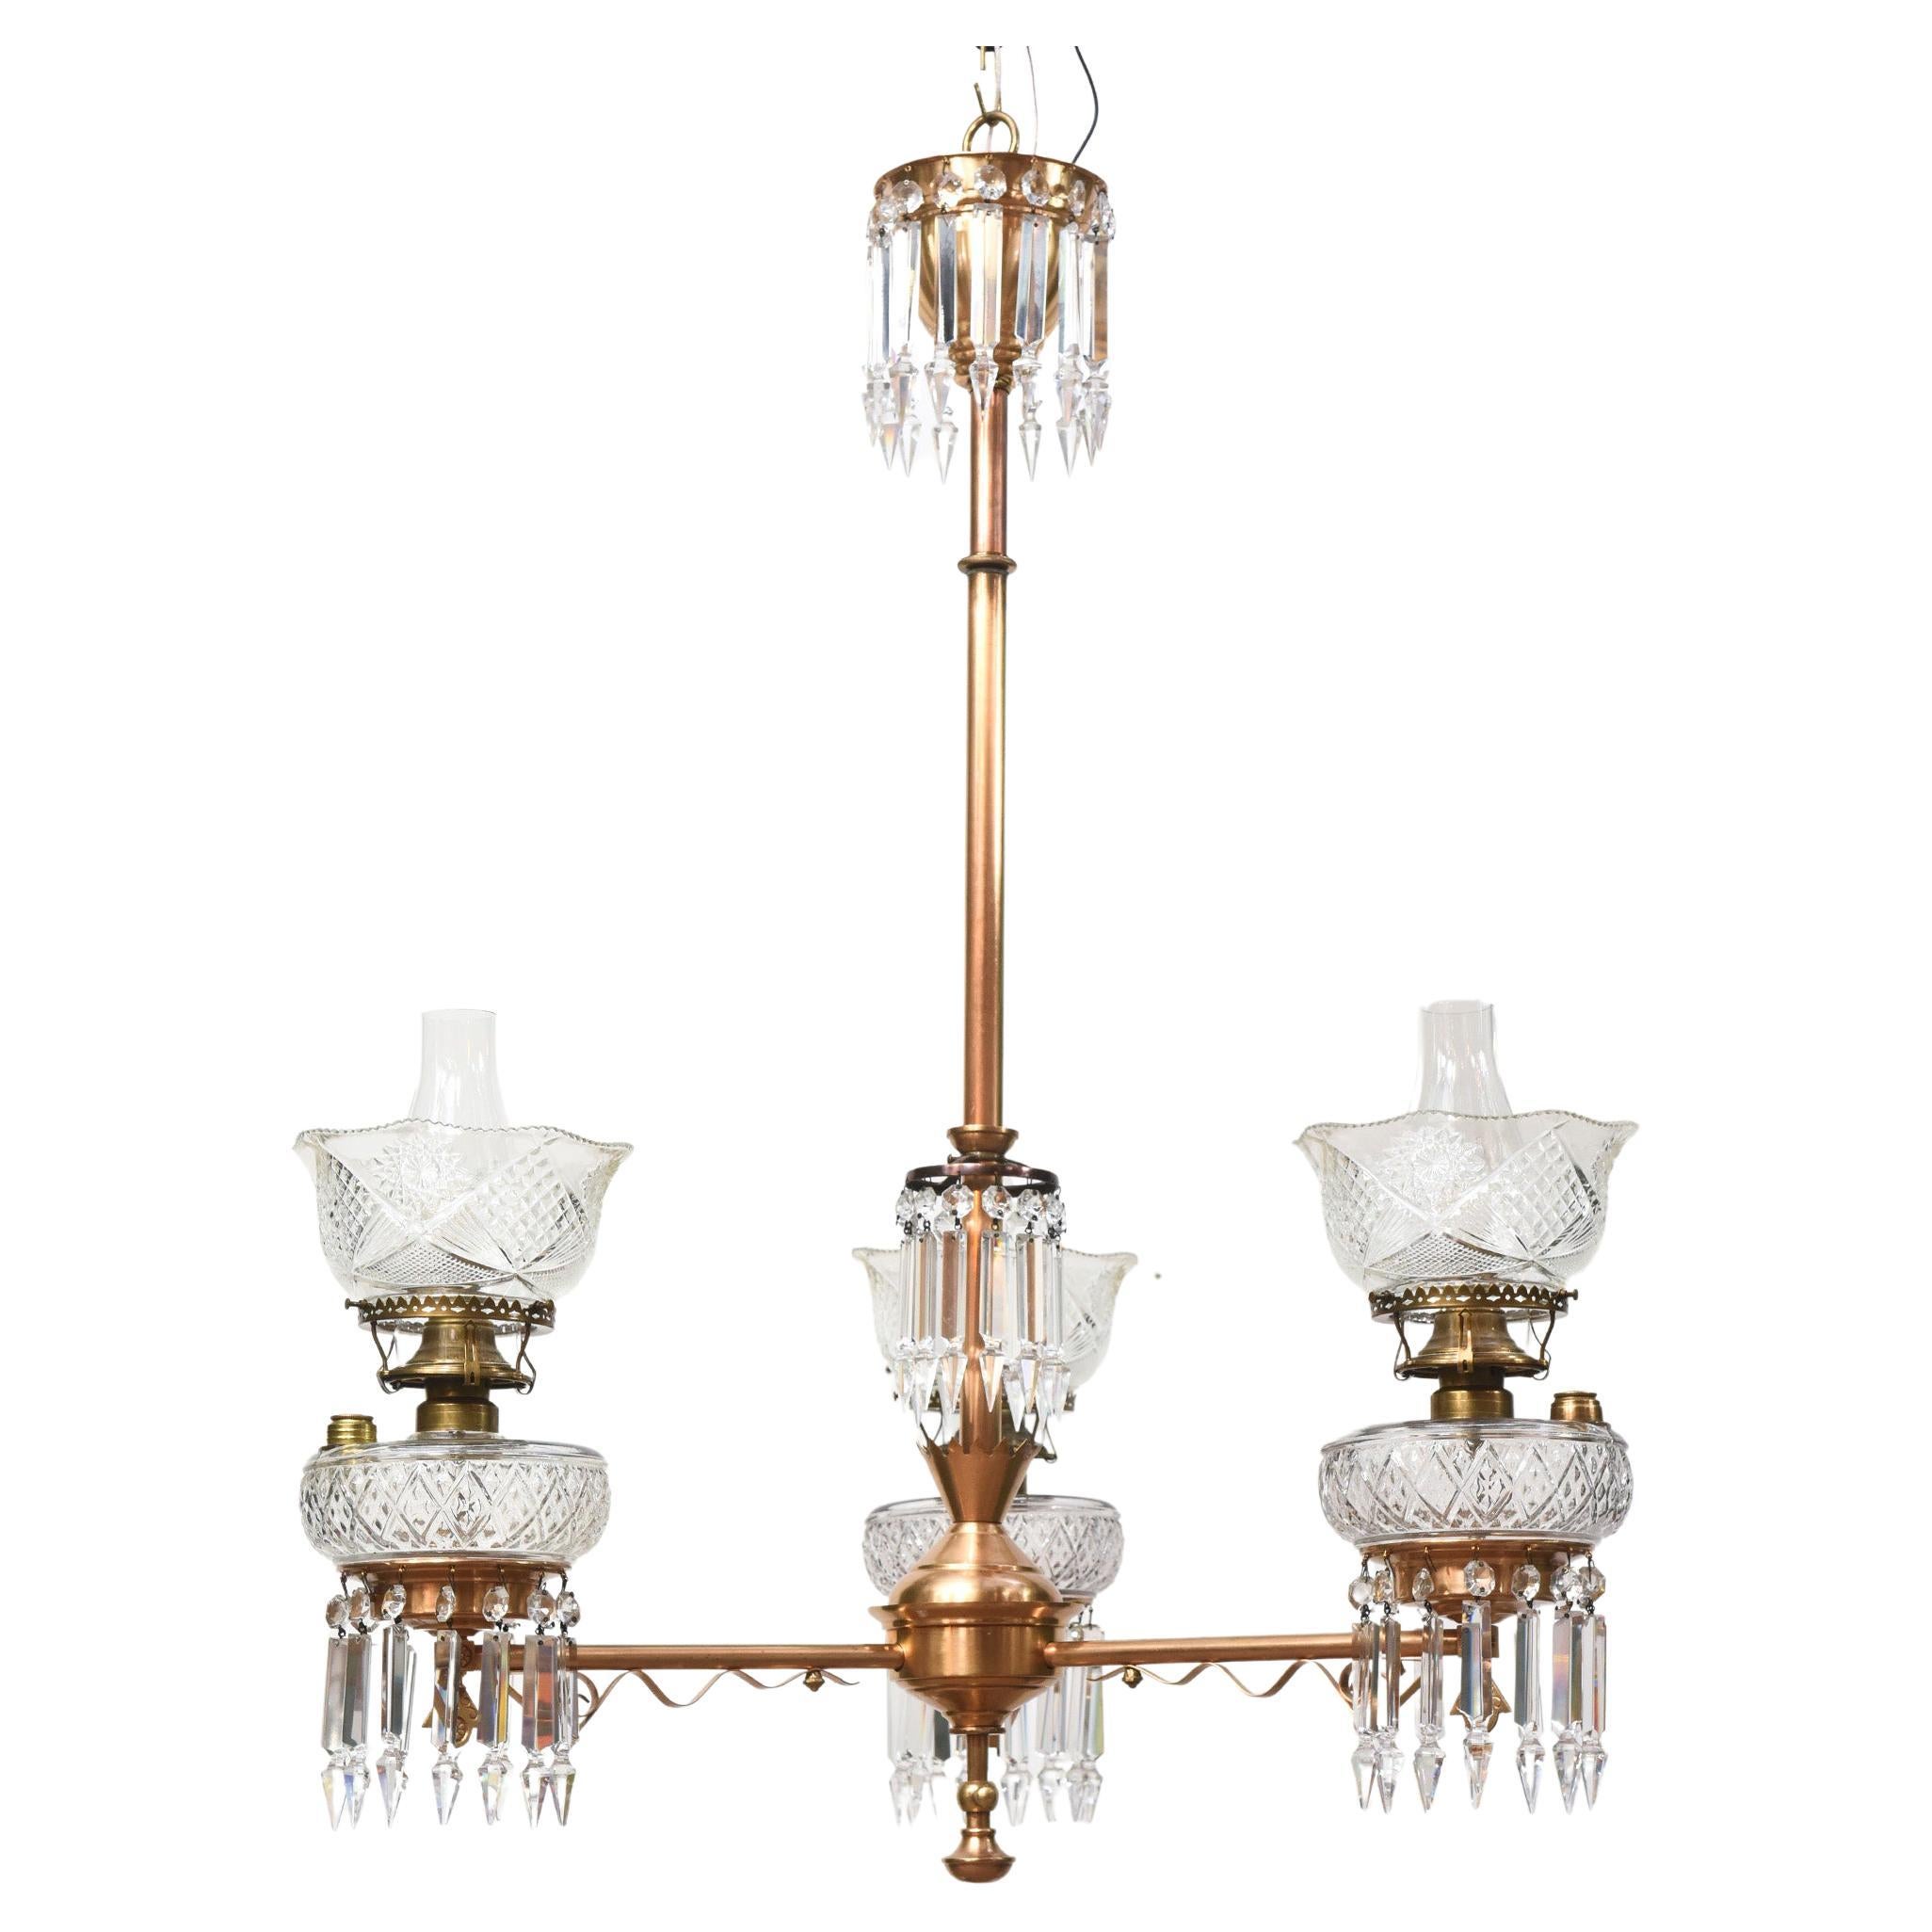 Three Light Aesthetic Movement Red Brass and Crystal Chandelier